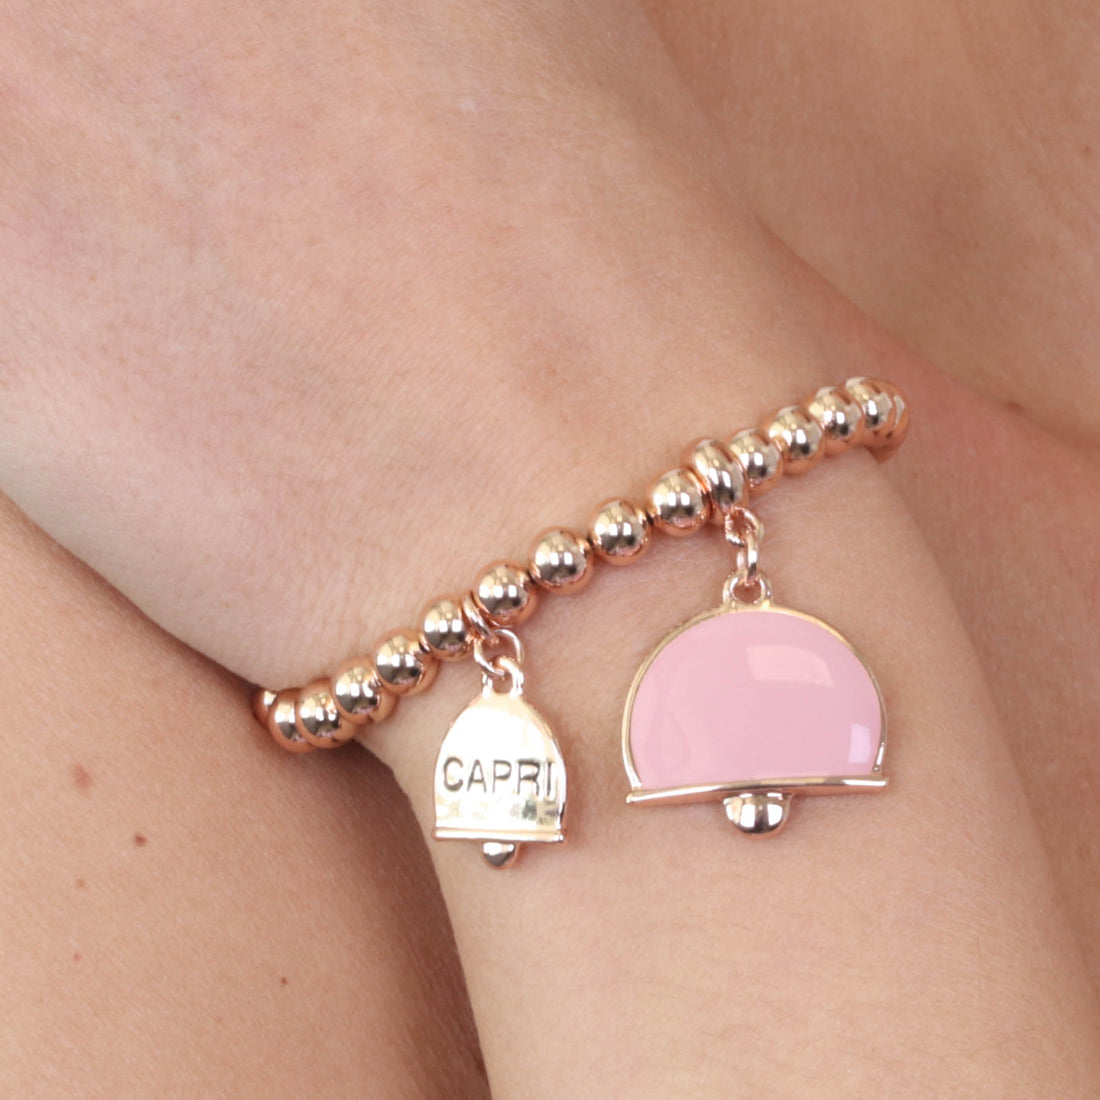 Metal bracelet spheres shirt, with dual crushed bell charm, embellished with pink enamel